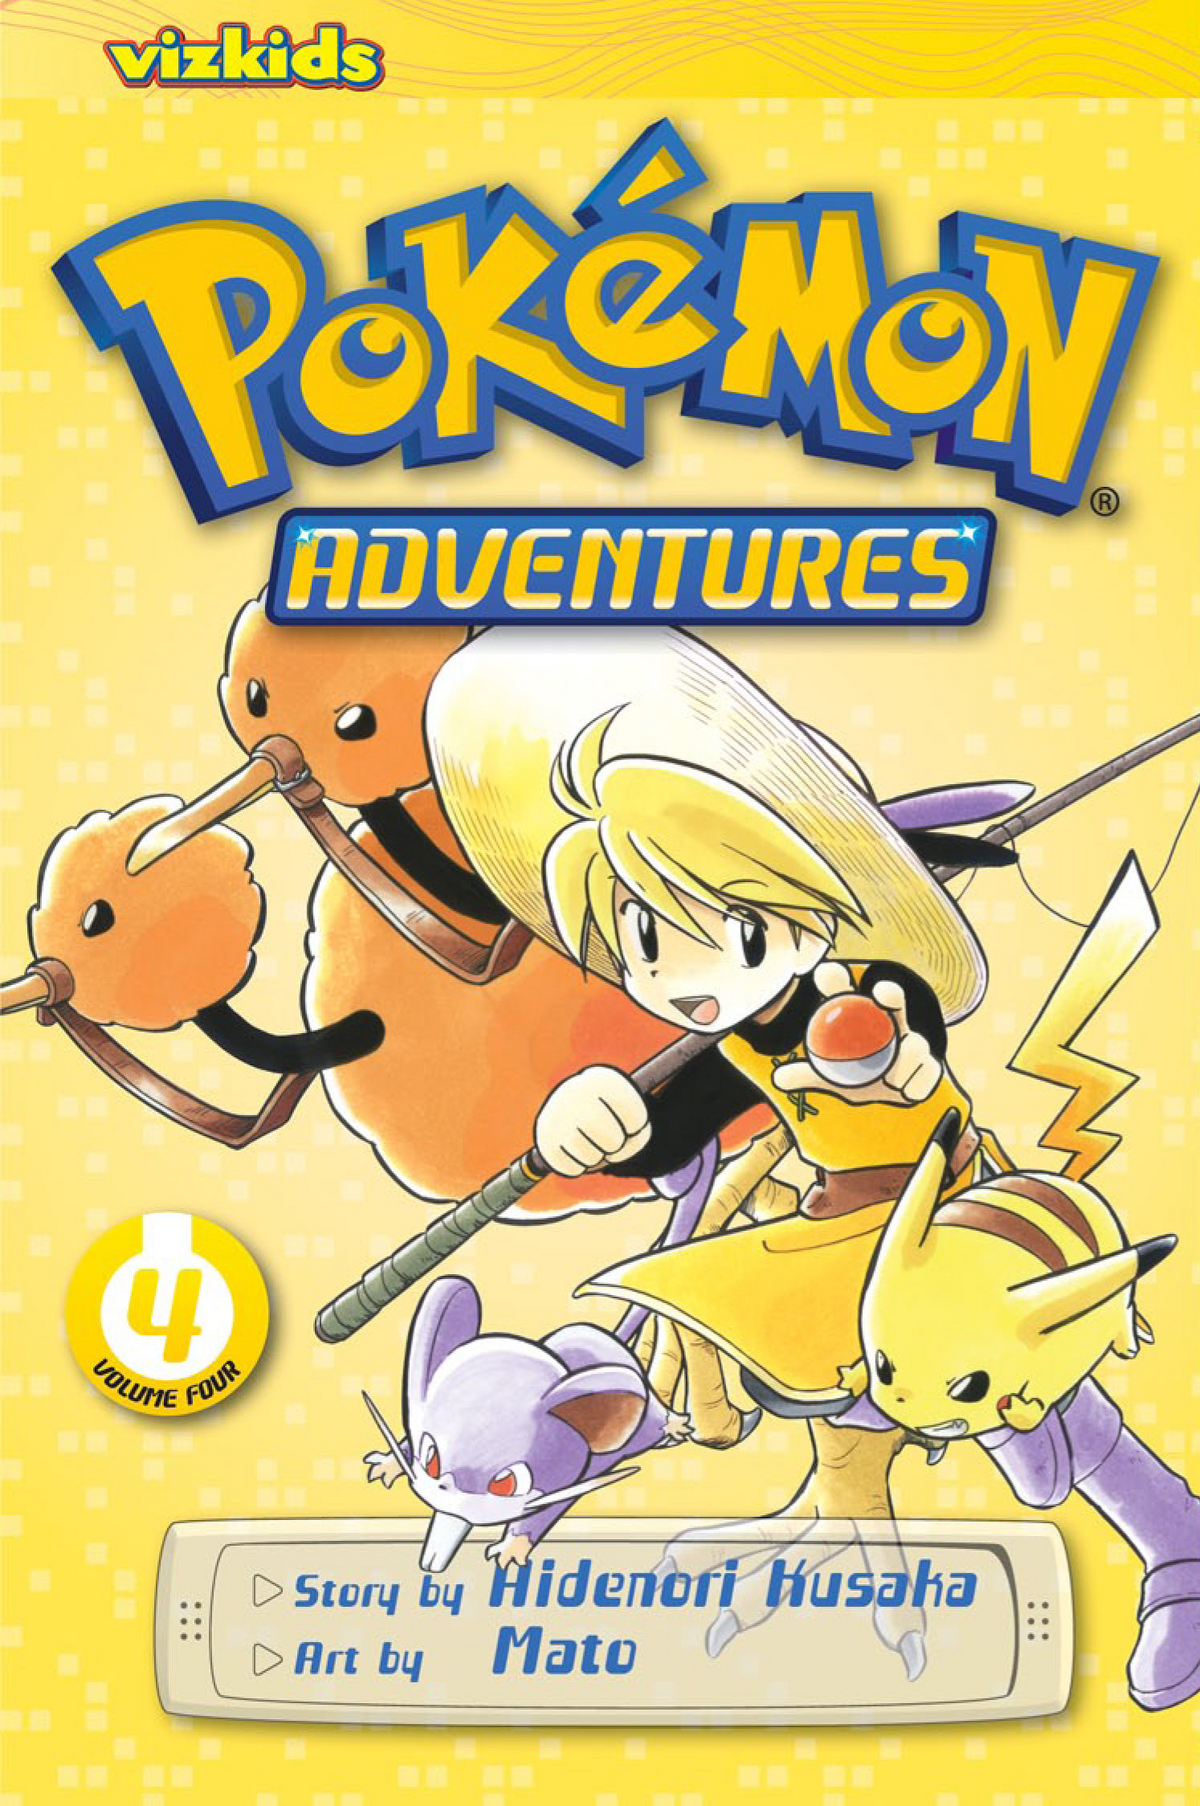 Updated Dream Remake For Pokémon Yellow